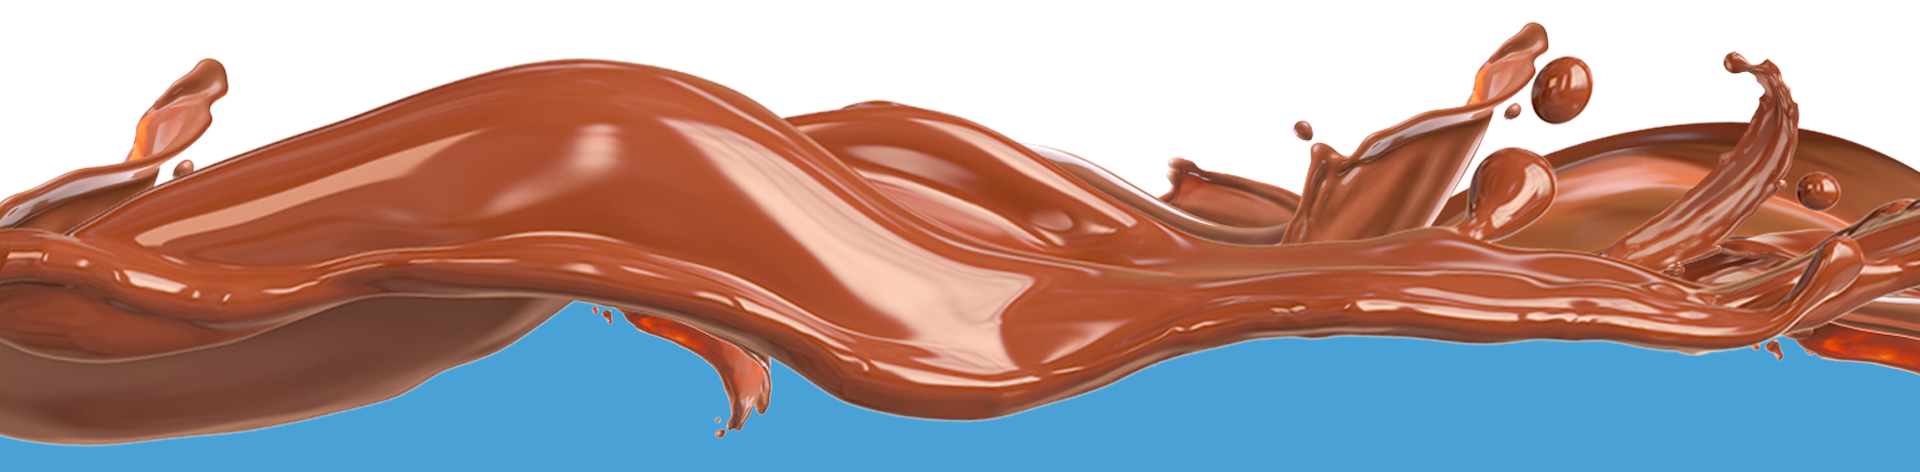 chocolate footer 